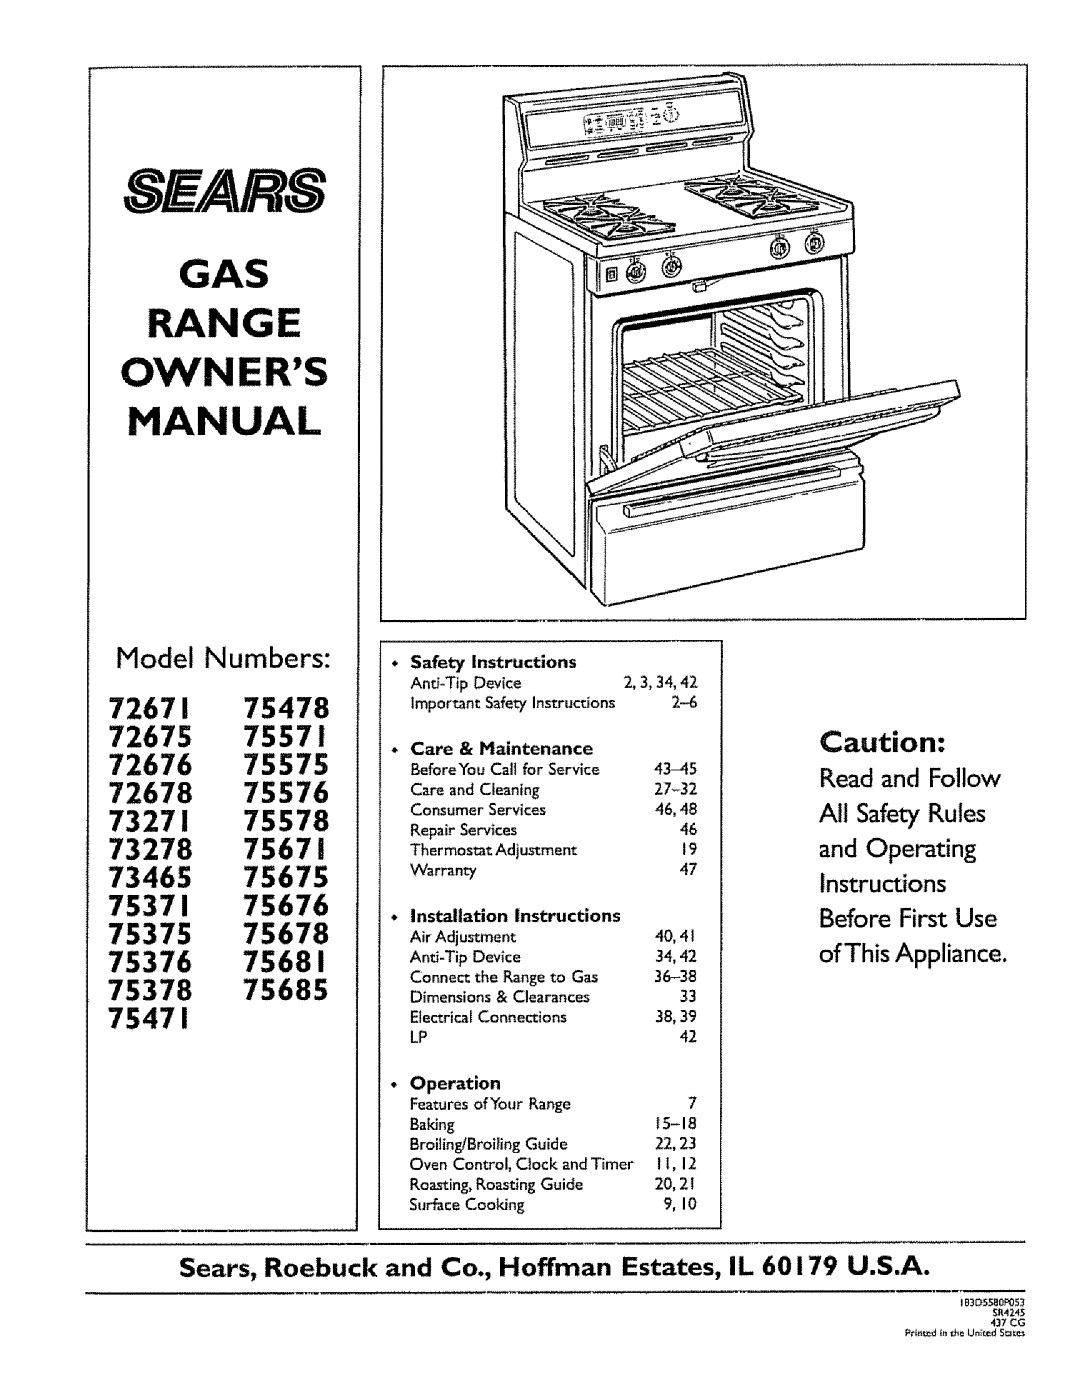 Sears 72675 owner manual Model Numbers, 6E/.aR8, Gas Range Owners Manual, Read and Follow, Safety Rules, and Operating 